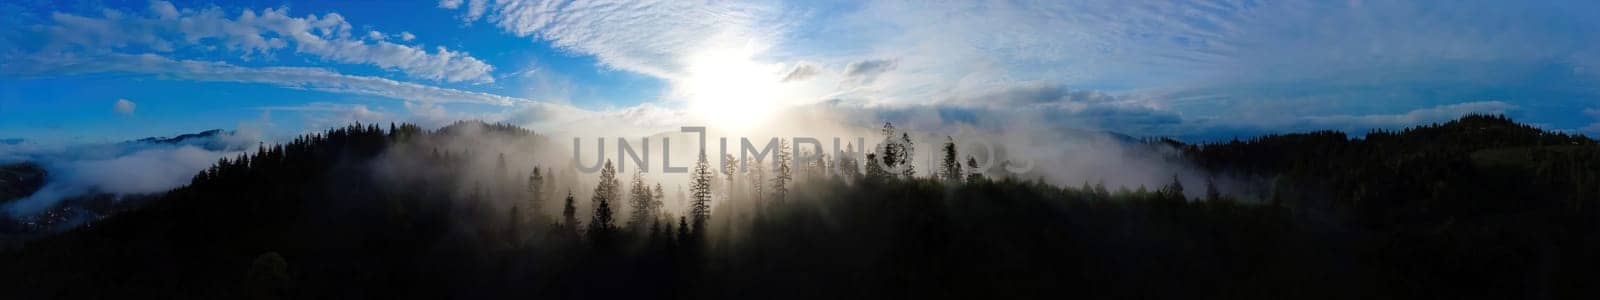 Panoramic Mountain landscape in fog, landscape with misty mountain forest, sun under peak by igor010